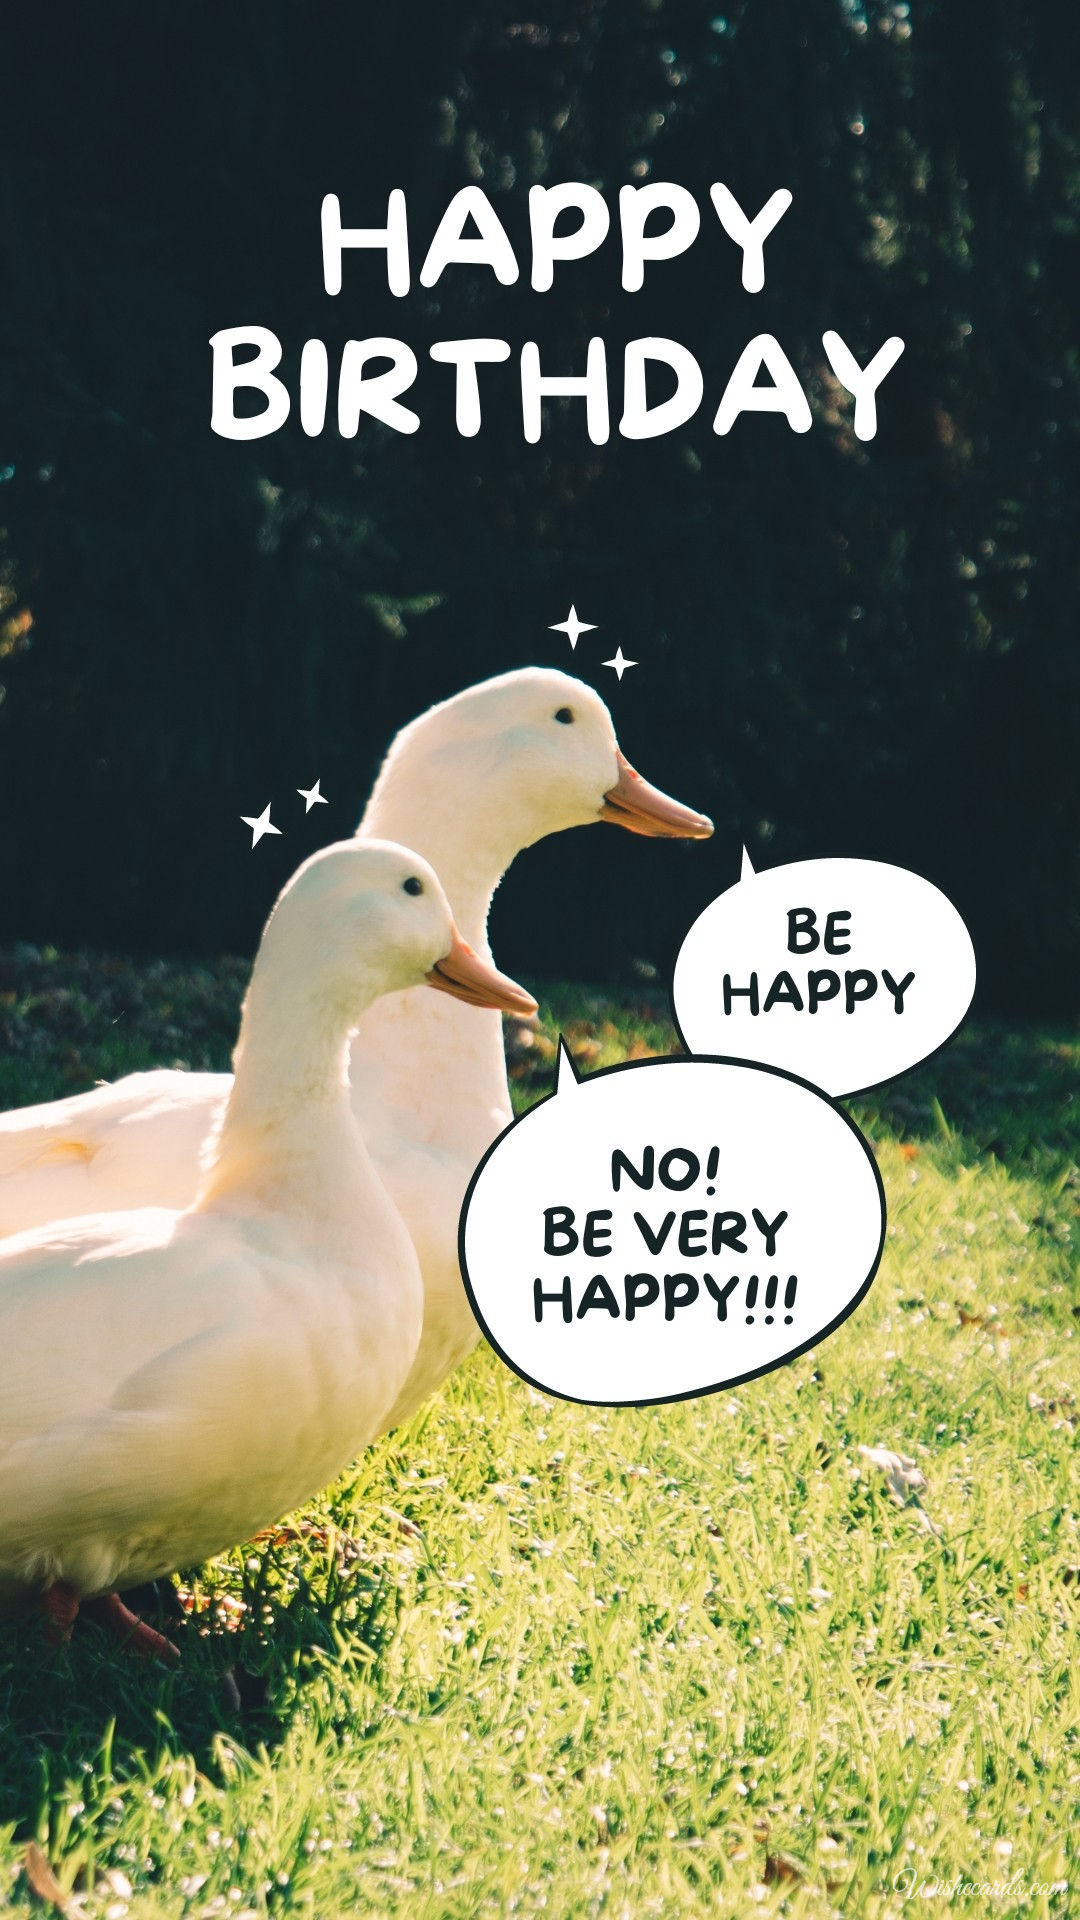 Happy Birthday Cards with Ducks